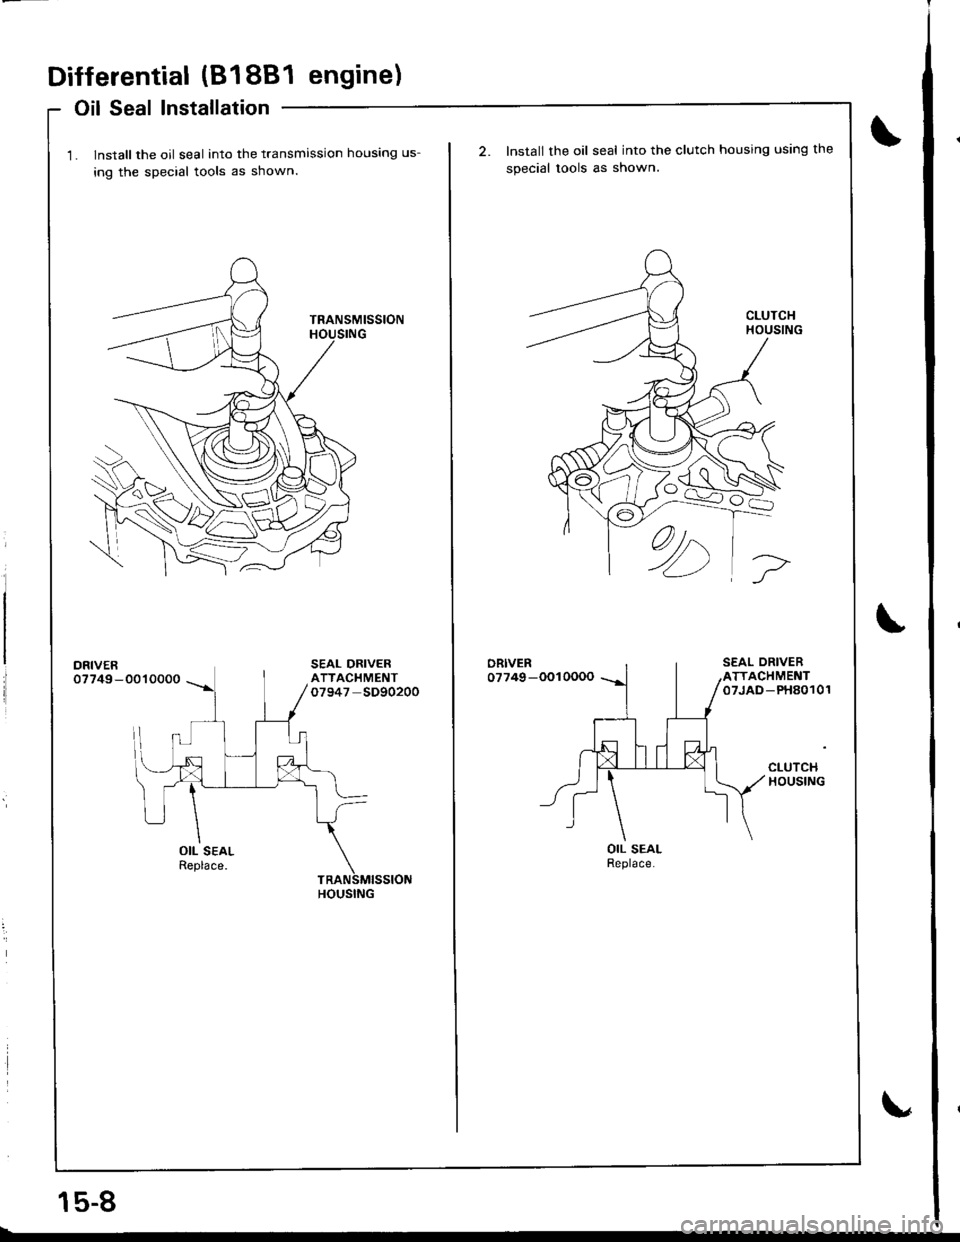 HONDA INTEGRA 1998 4.G Service Manual Differential (81881 engine)
Oil Seal Installation
1. lnstall the oil seal into the transmission housing us-
ing the special tools as shown
DRIVER07749-0010000
OIL SEALReplace.
HOUSING
15-8
Install the